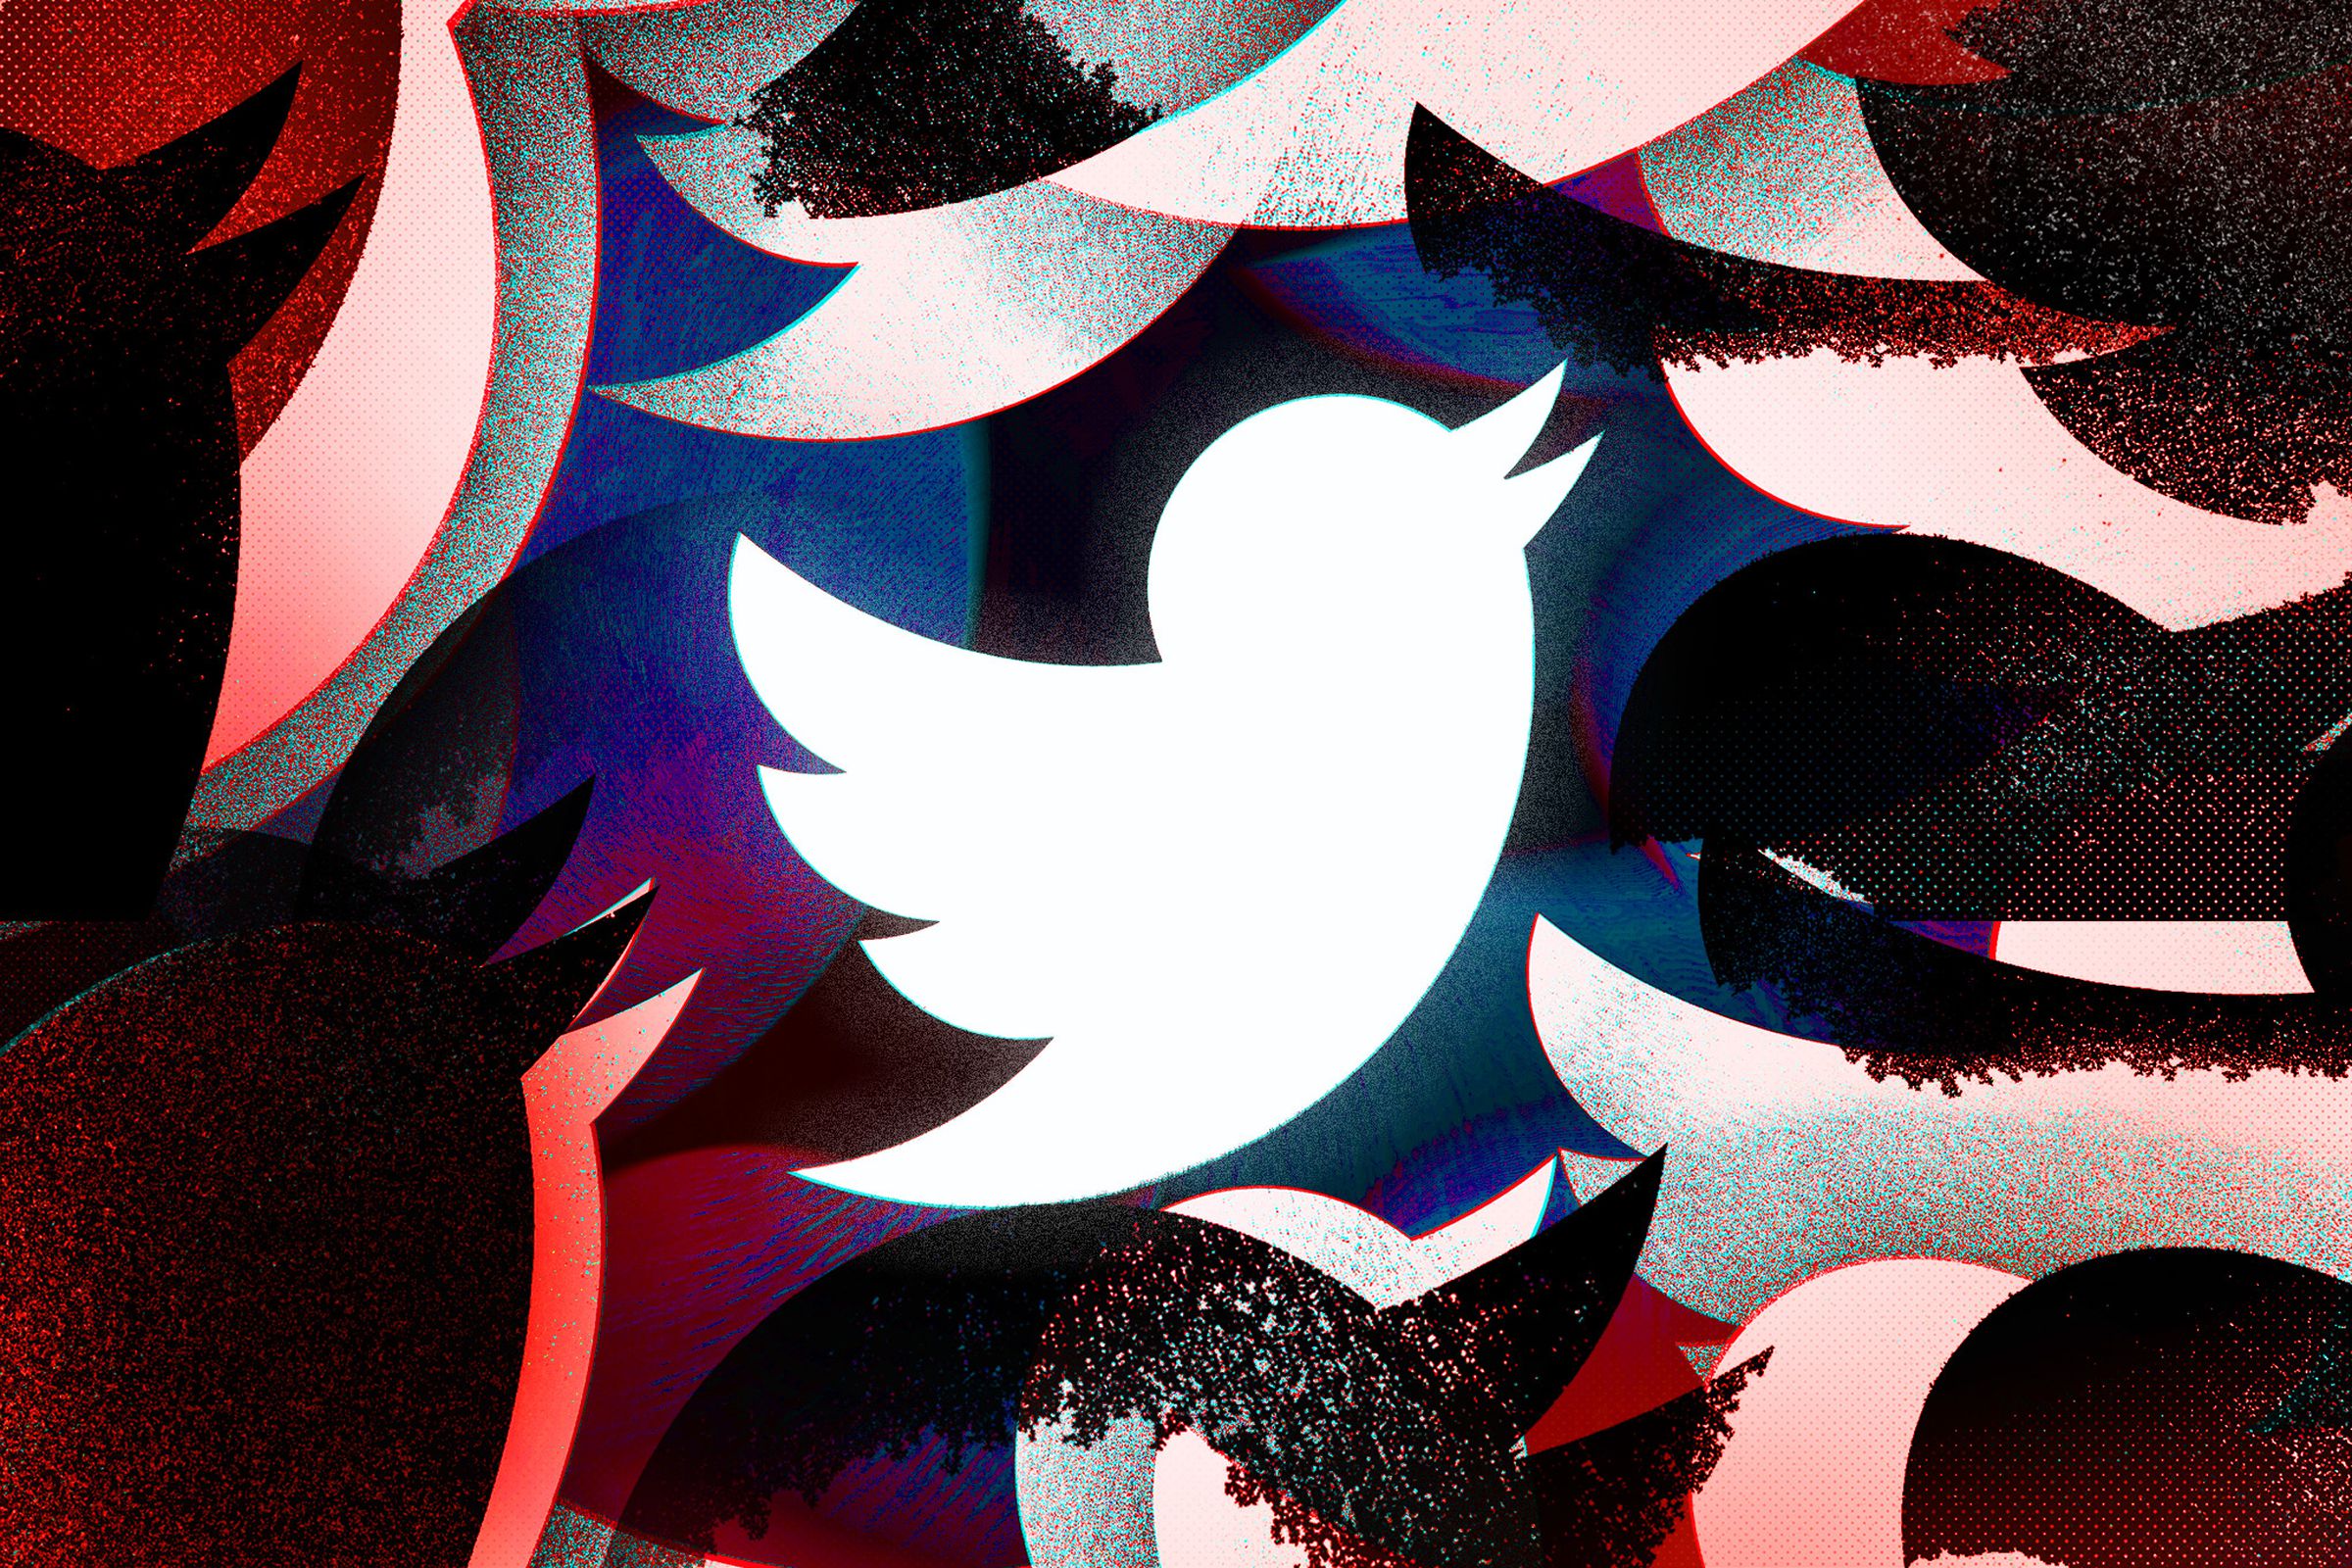 Twitter has updated its web platform to prevent users’ feeds from auto-refreshing